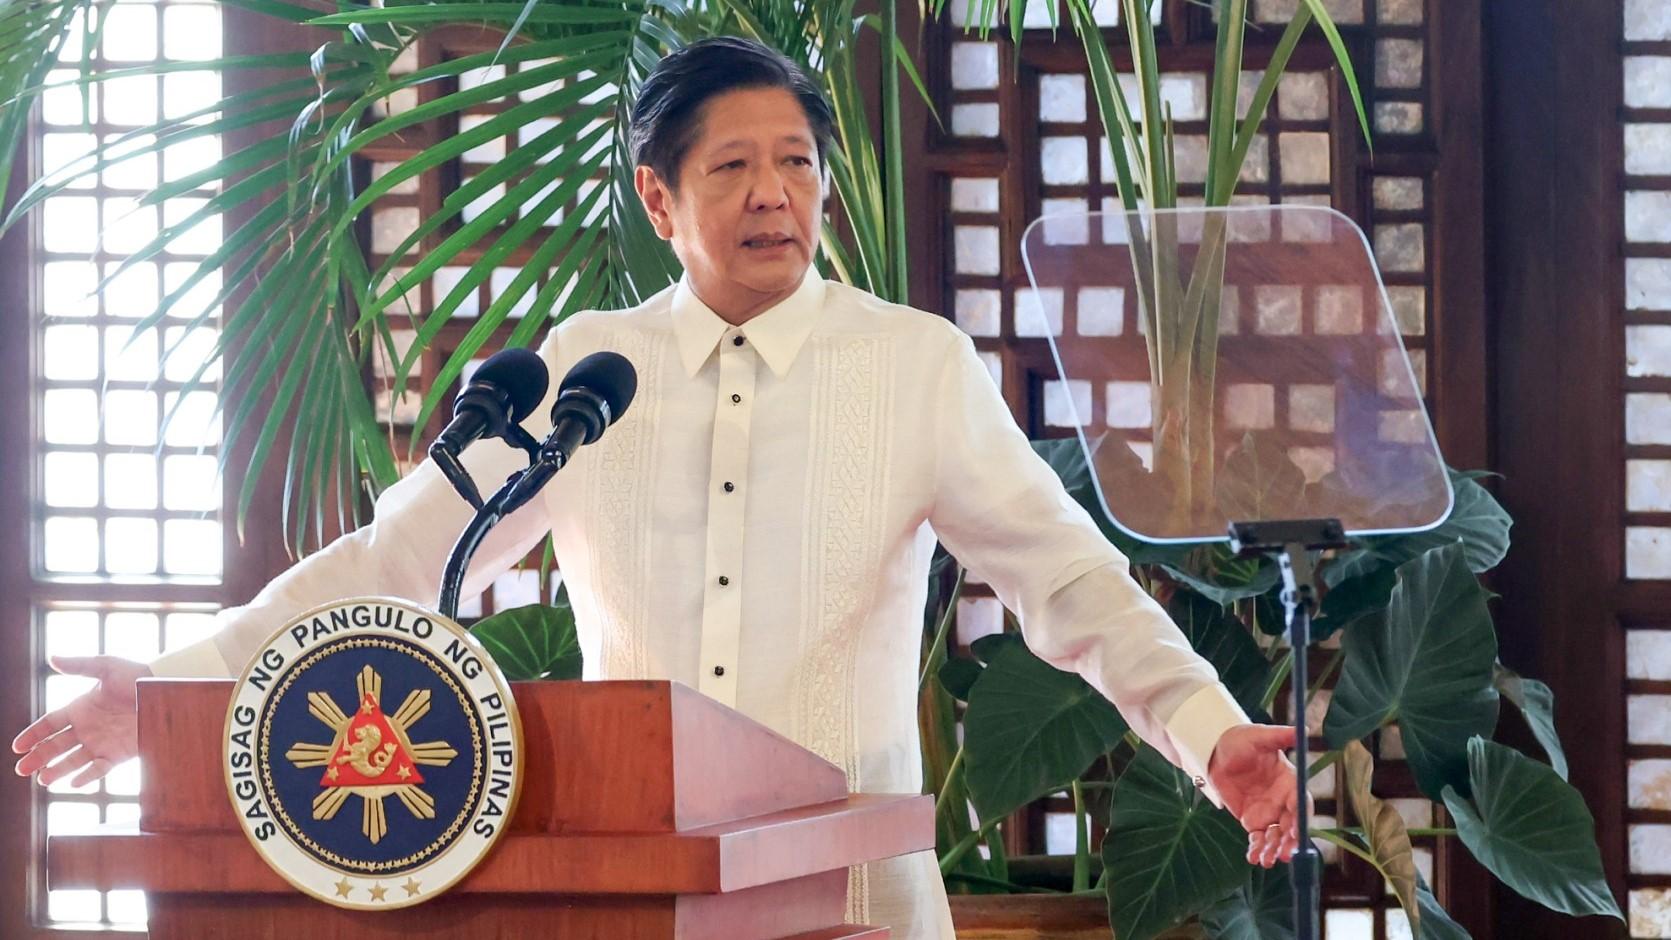 President Ferdinand Marcos prohibited government officials and personnel from using sirens, blinkers